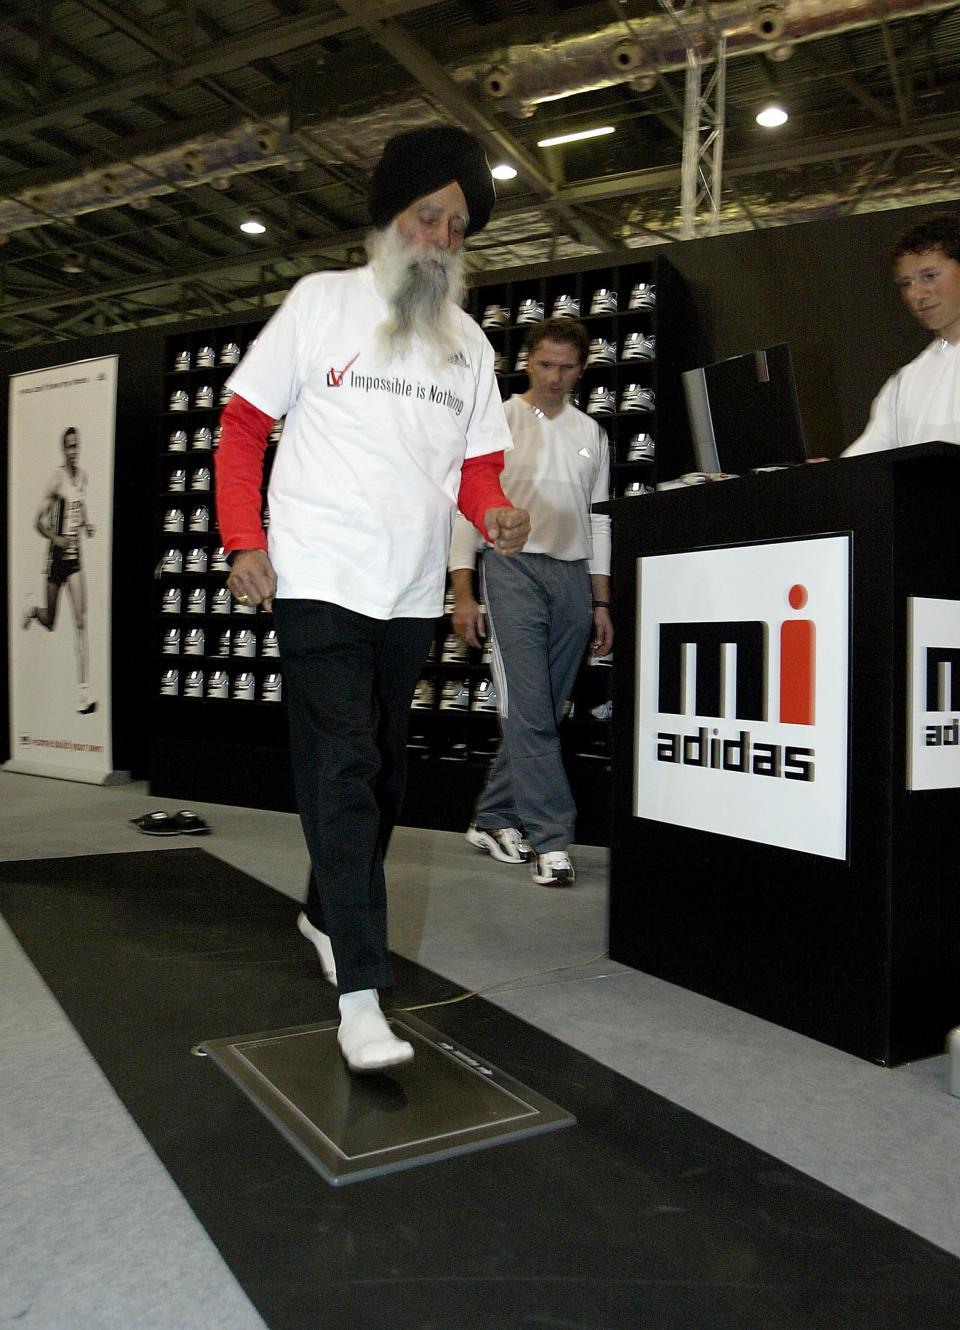 LONDON, ENGLAND - APRIL 15: Fauja Singh, 93 and the oldest competing runner in the London Marathon, designs his own shoe at the Adidas stand at the Marathon Exhibition being held at the Excel Centre on April 15, 2004 in London. (Photo by John Gichigi/Getty Images for adidas) 